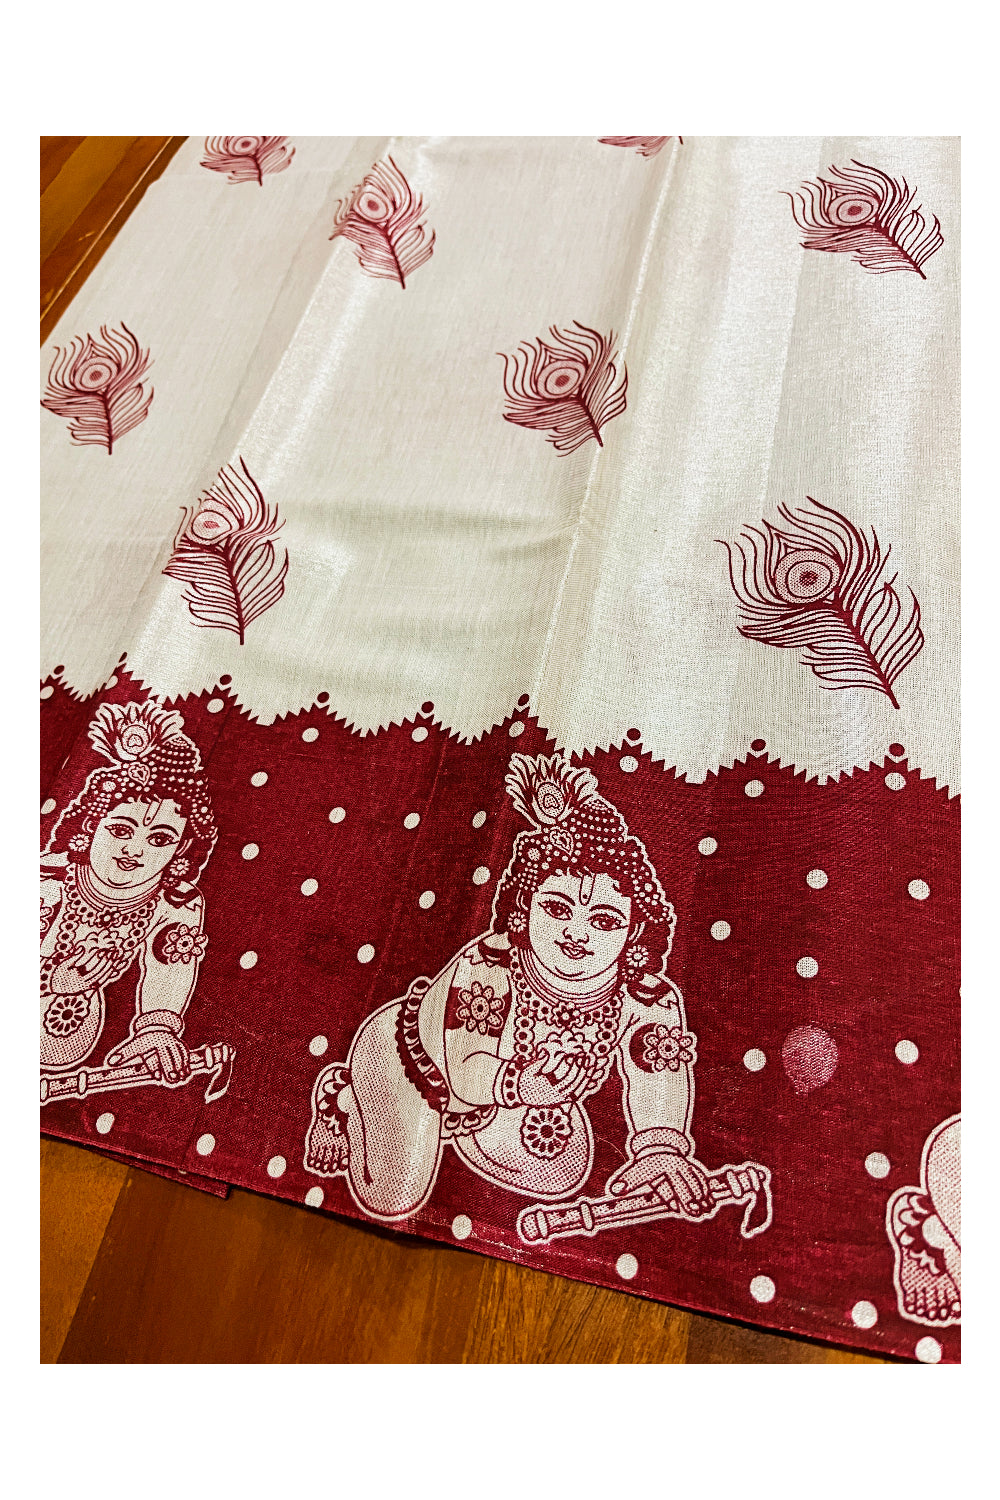 Kerala Silver Tissue Block Printed Pavada and Red Blouse Material for Kids 3 Meters